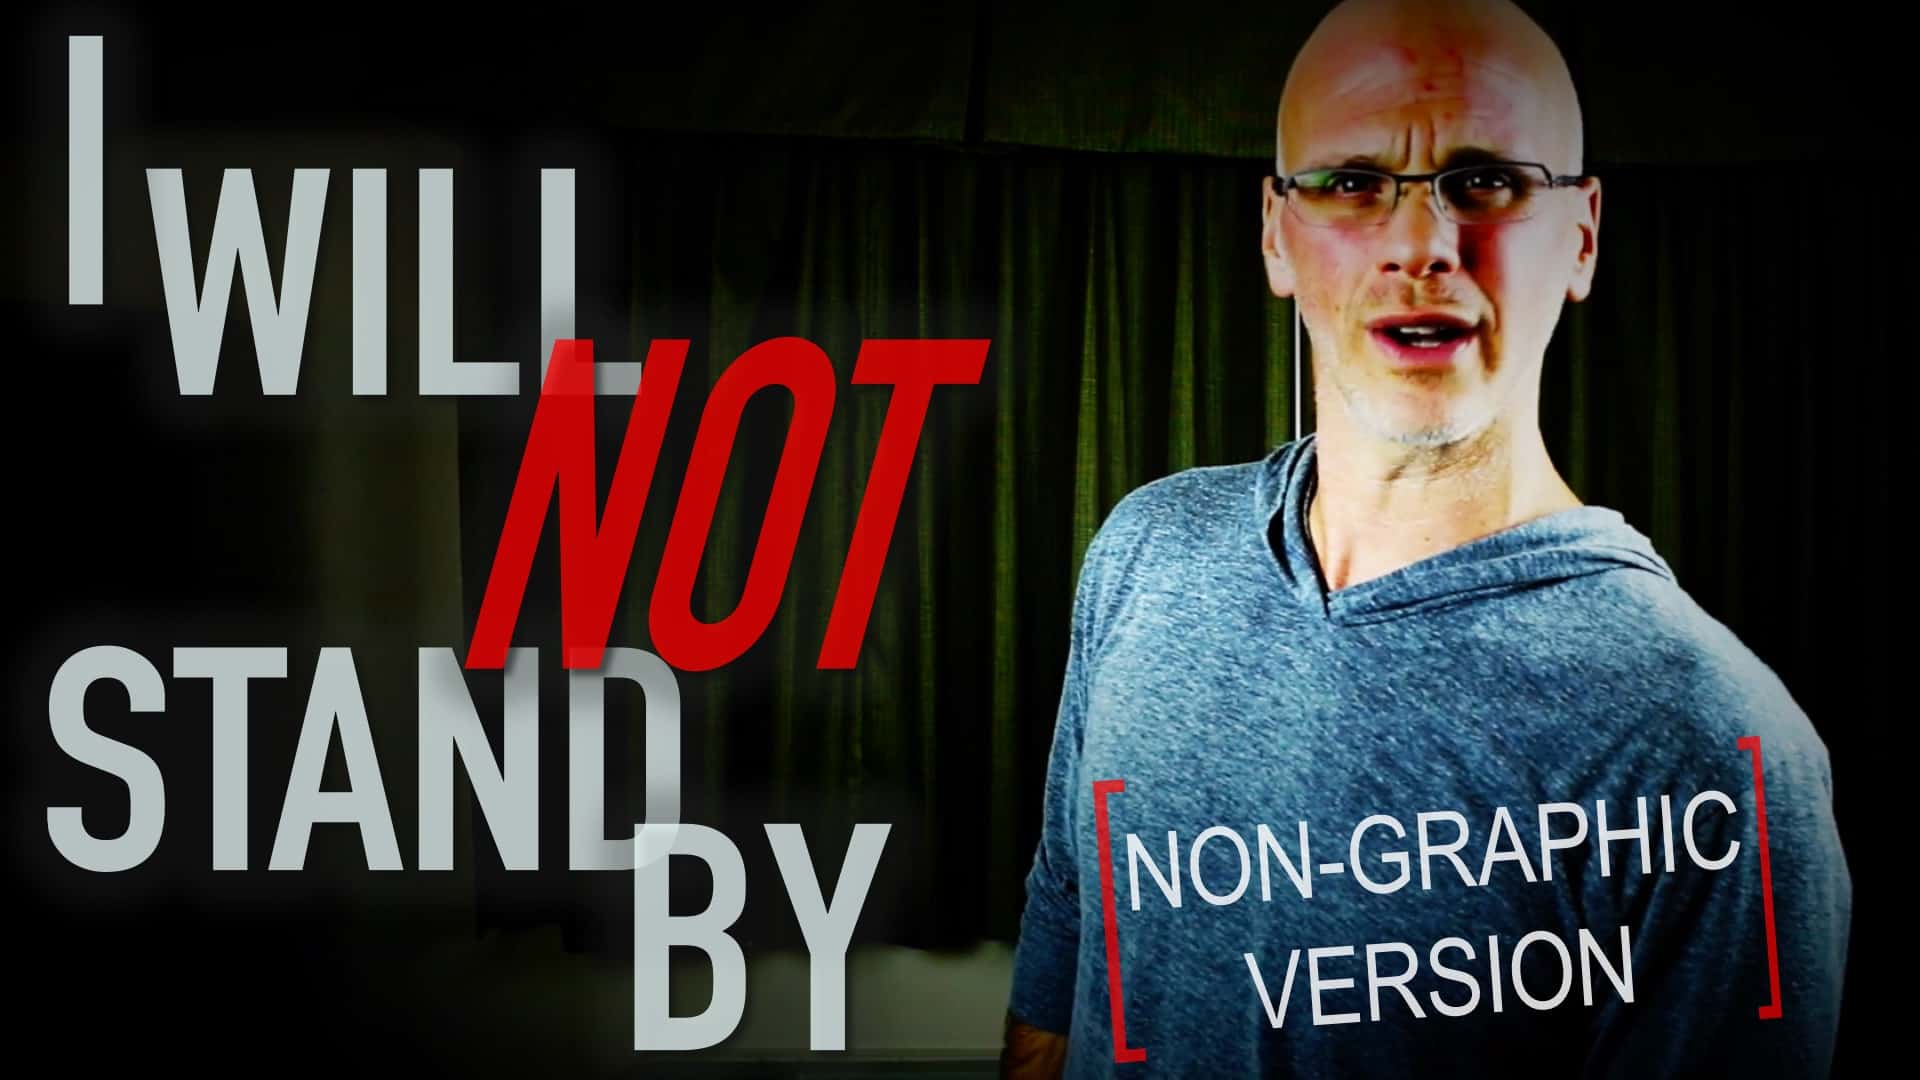 Author and vegan activist Gary Yourofsky is seen next to the words: “I will not stand by.” Overlaying the image of Gary are the words: ”Non-graphic version”.